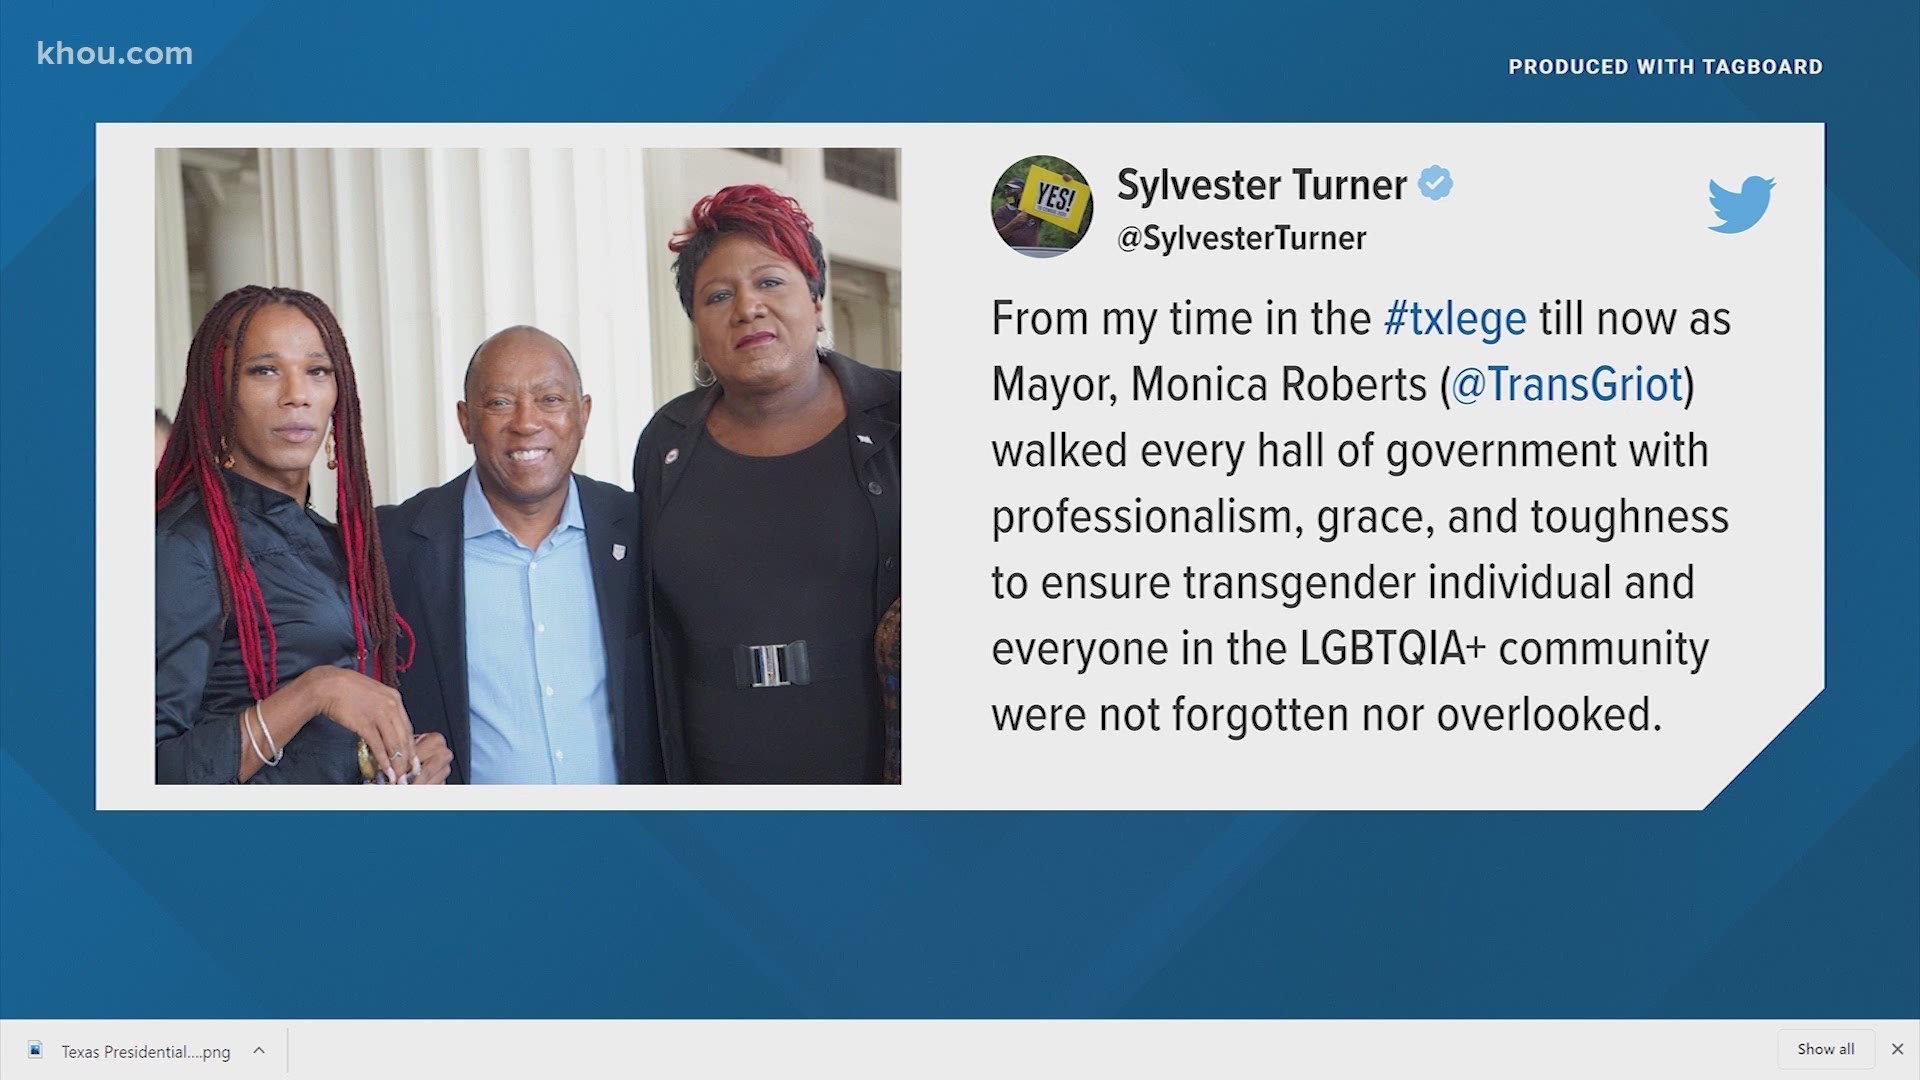 Transgender rights advocate and journalist Monica Roberts is being mourned in Houston and across the country after her death this week at the age of 58.